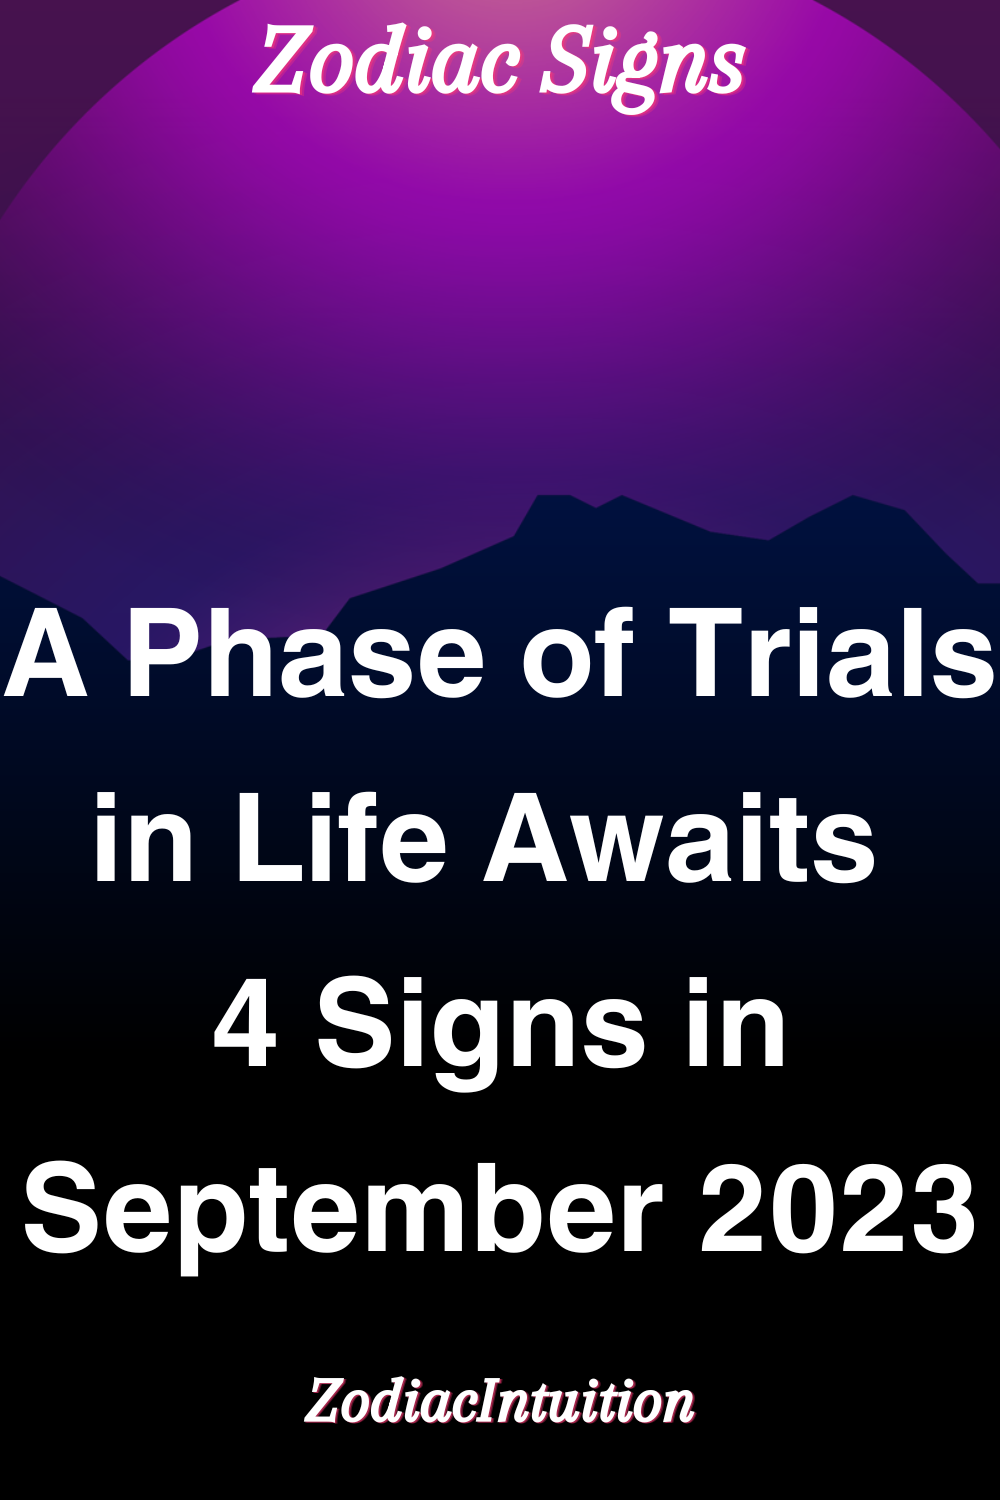 A Phase of Trials in Life Awaits 4 Signs in September 2023